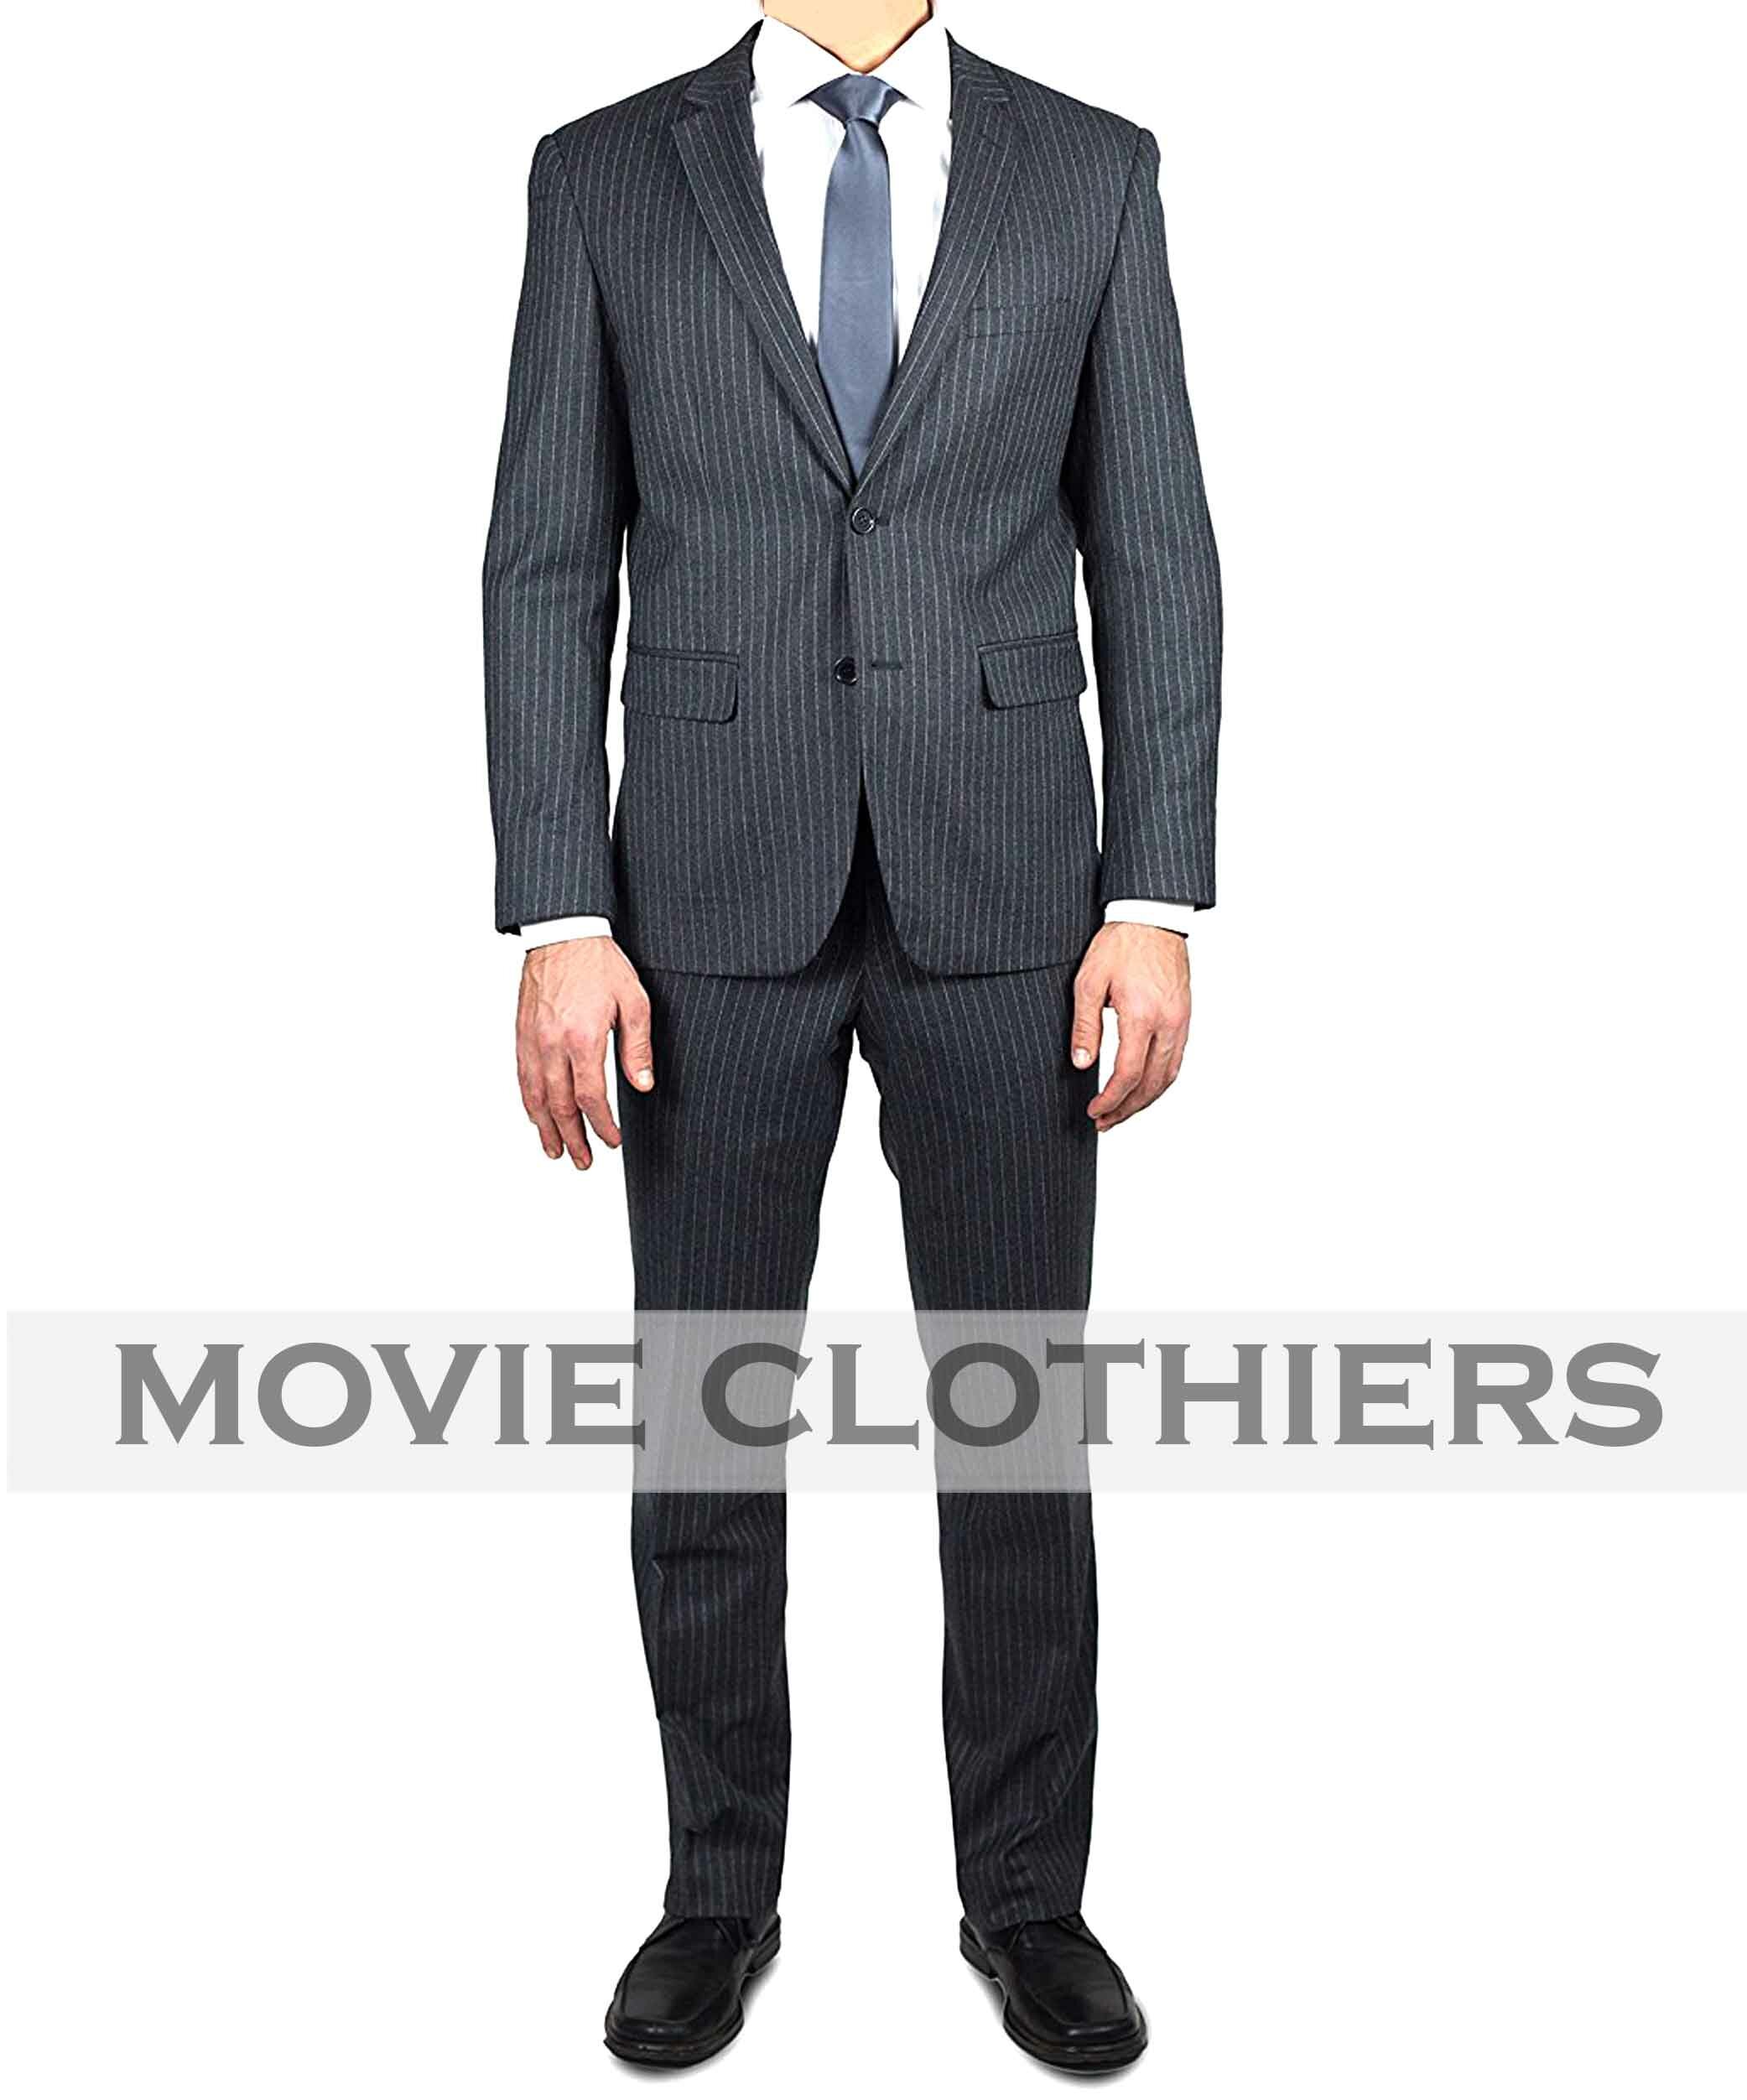 Skyfall Charcoal Grey Pinstripe Suit